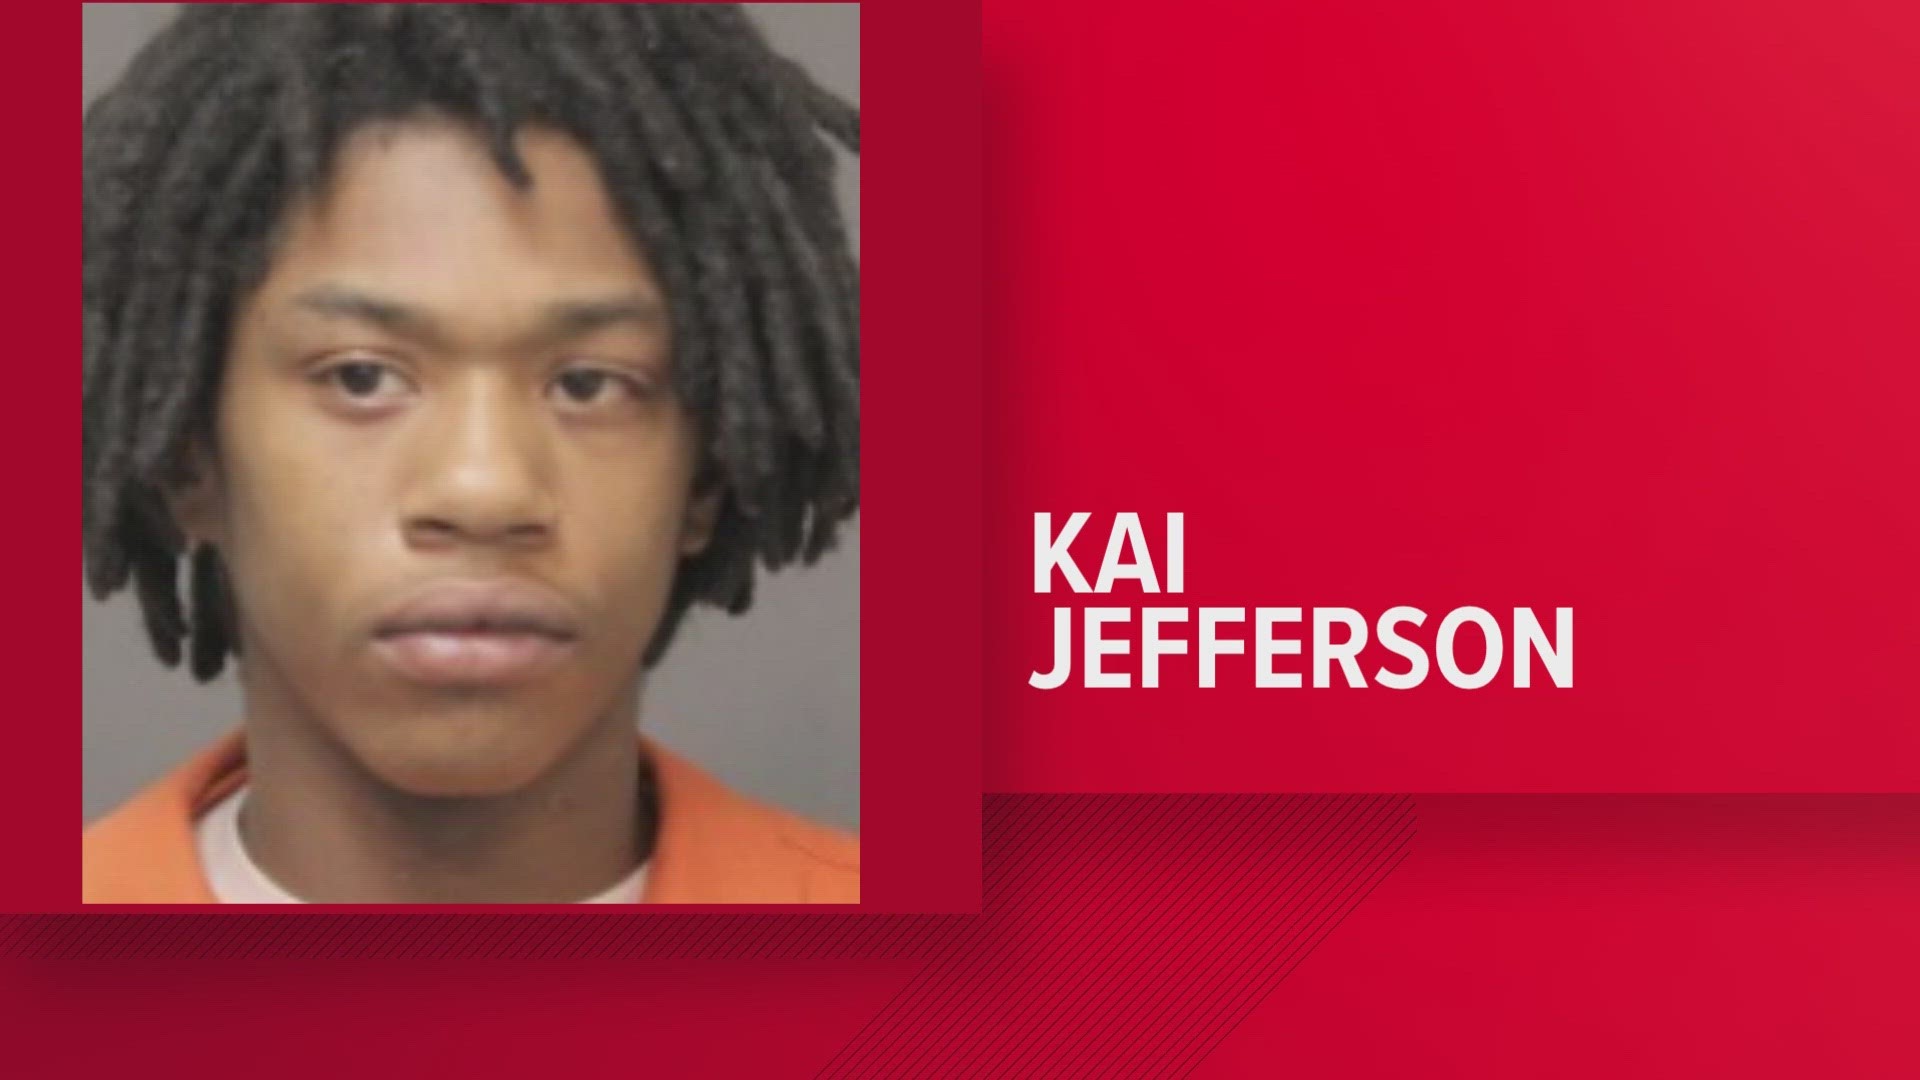 Kai Jefferson, 16, escaped the Office of Juvenile Justice after he was arrested for threatening to shoot a woman multiple times.